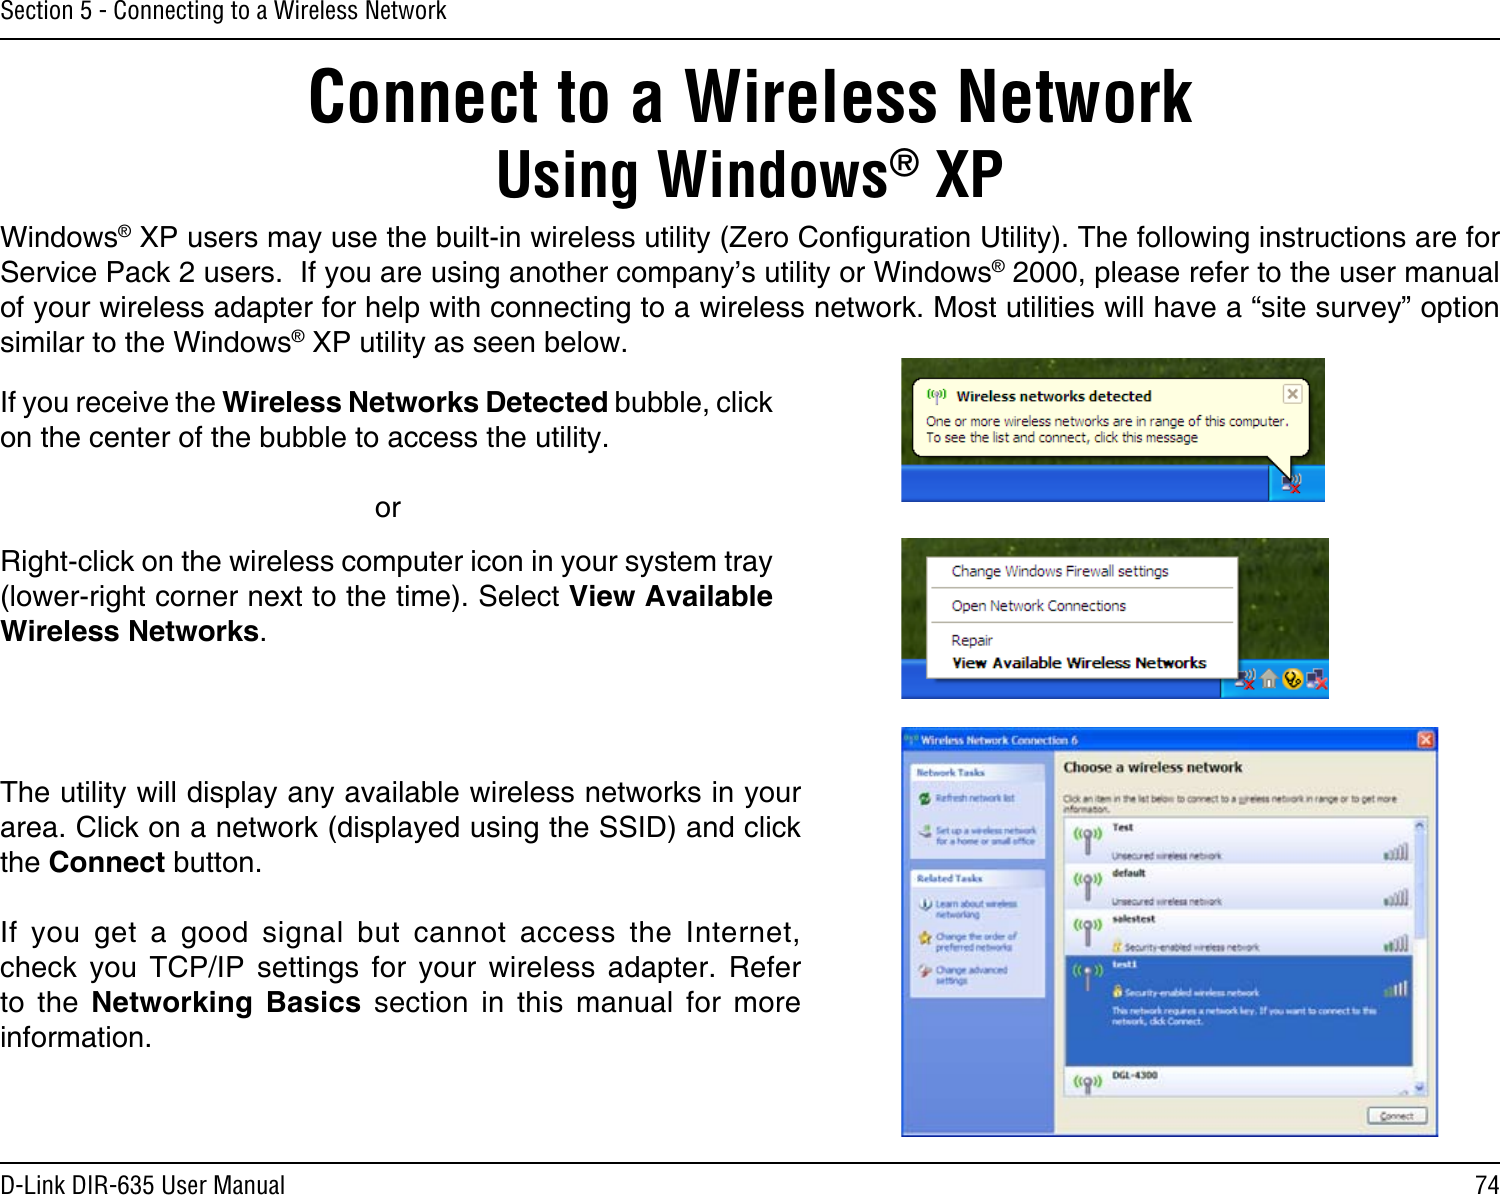 74D-Link DIR-635 User ManualSection 5 - Connecting to a Wireless NetworkConnect to a Wireless NetworkUsing Windows® XPWindows® XP users may use the built-in wireless utility (Zero Conguration Utility). The following instructions are for Service Pack 2 users.  If you are using another company’s utility or Windows® 2000, please refer to the user manual of your wireless adapter for help with connecting to a wireless network. Most utilities will have a “site survey” option similar to the Windows® XP utility as seen below.Right-click on the wireless computer icon in your system tray (lower-right corner next to the time). Select View Available Wireless Networks.If you receive the Wireless Networks Detected bubble, click on the center of the bubble to access the utility.     orThe utility will display any available wireless networks in your area. Click on a network (displayed using the SSID) and click the Connect button.If  you  get  a  good  signal  but  cannot  access  the  Internet, check  you  TCP/IP  settings  for  your  wireless  adapter.  Refer to  the  Networking  Basics  section  in  this  manual  for  more information.